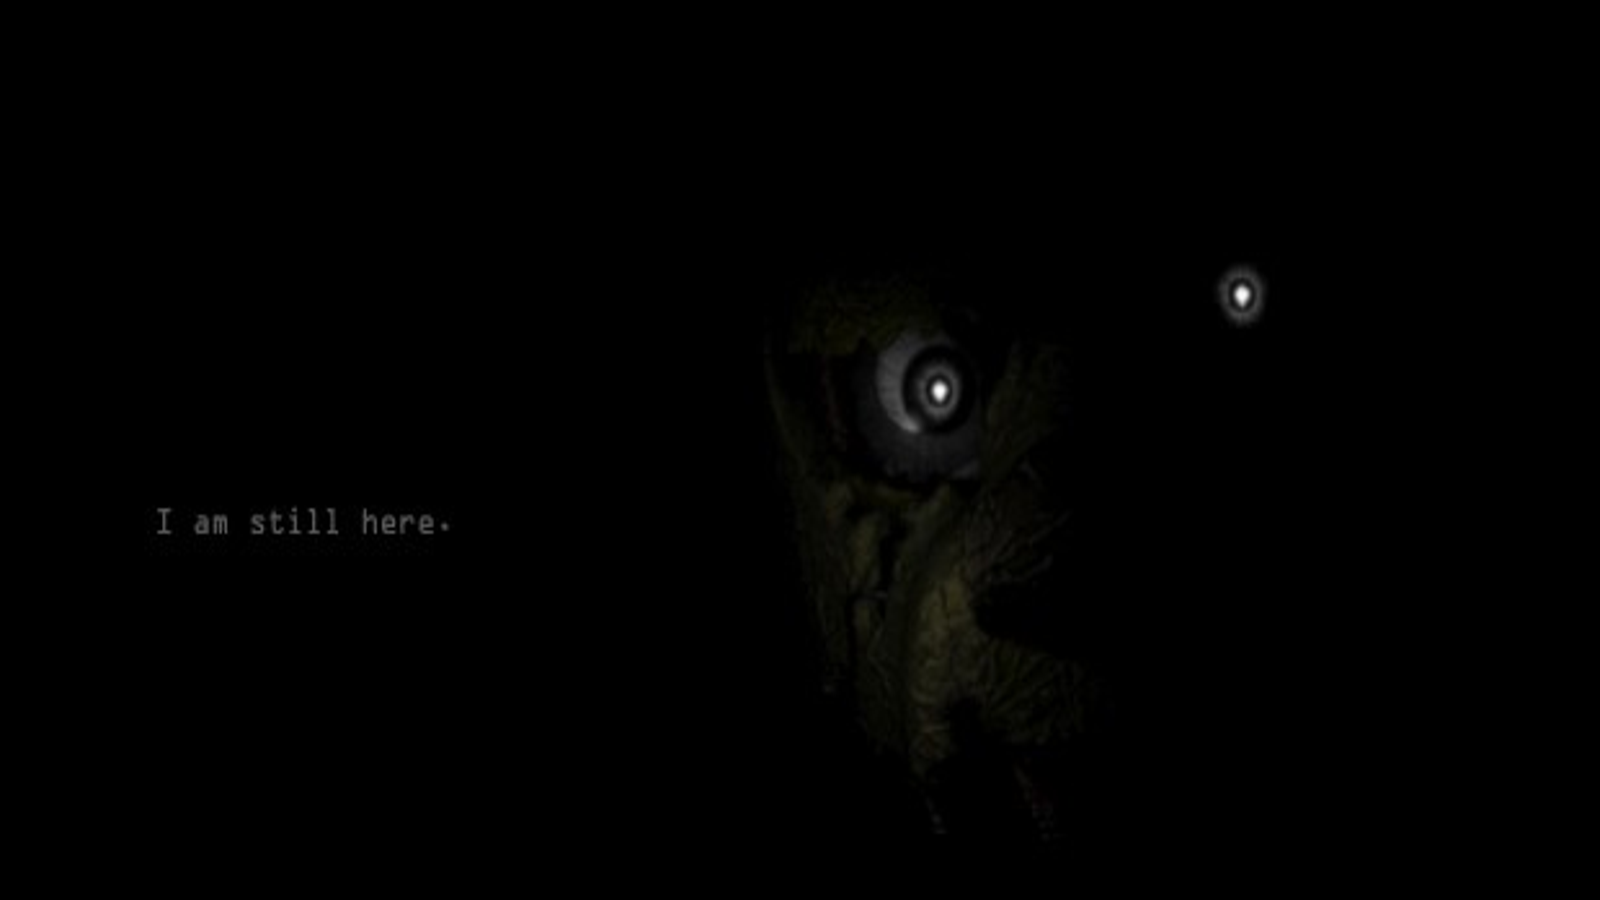 What Really Happened Before FNAF 3?